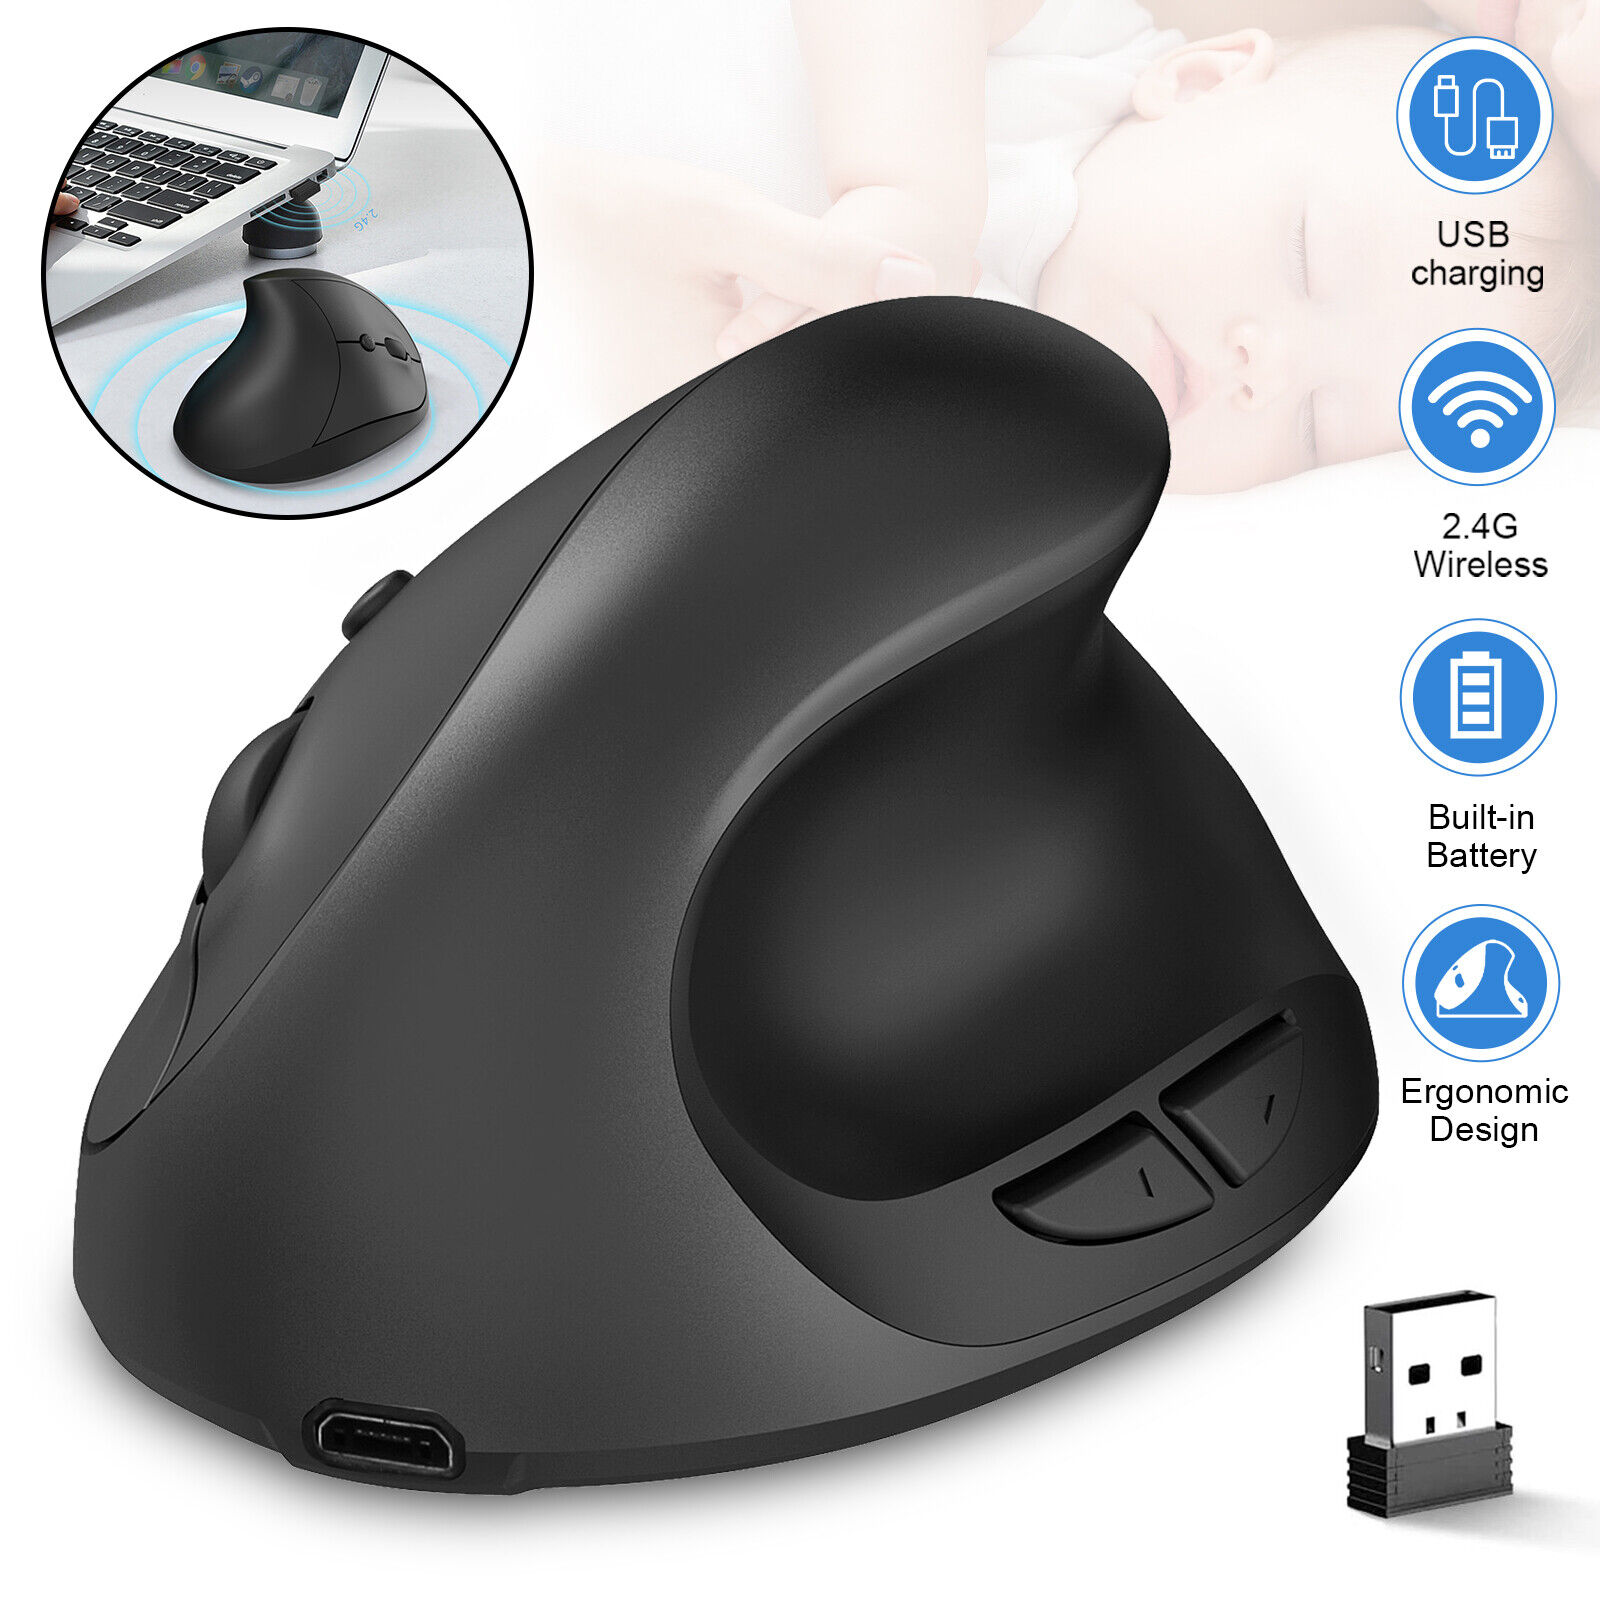 Ergonomic Vertical Mouse 6Buttons USB Wireless 2.4GHz 2400DPI for Windows 7 8 10